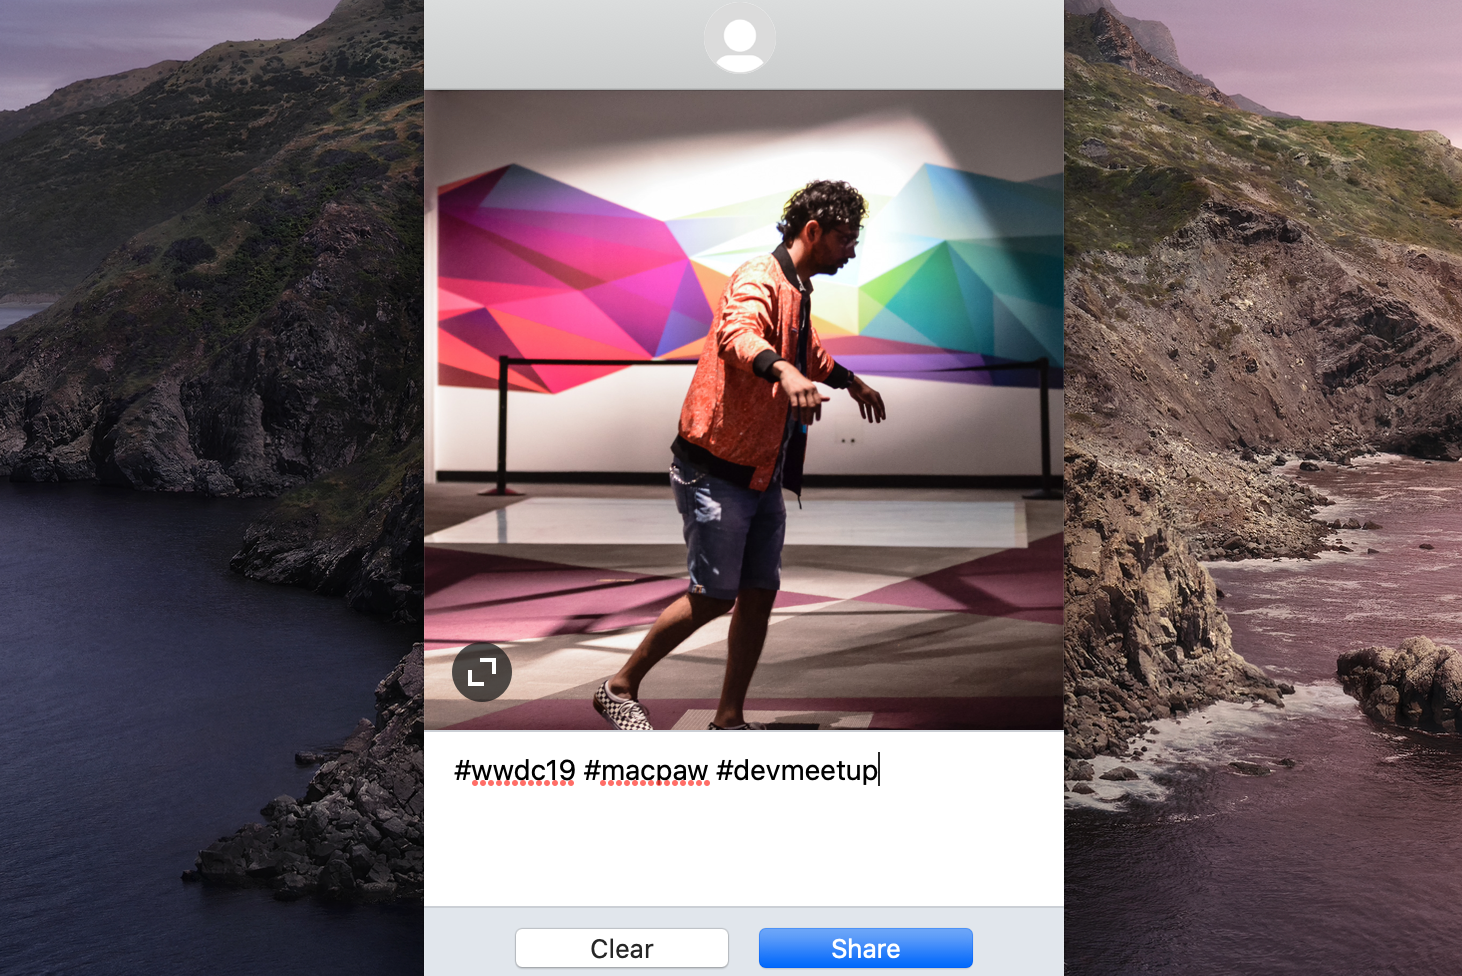 how to use instagram on macbook air